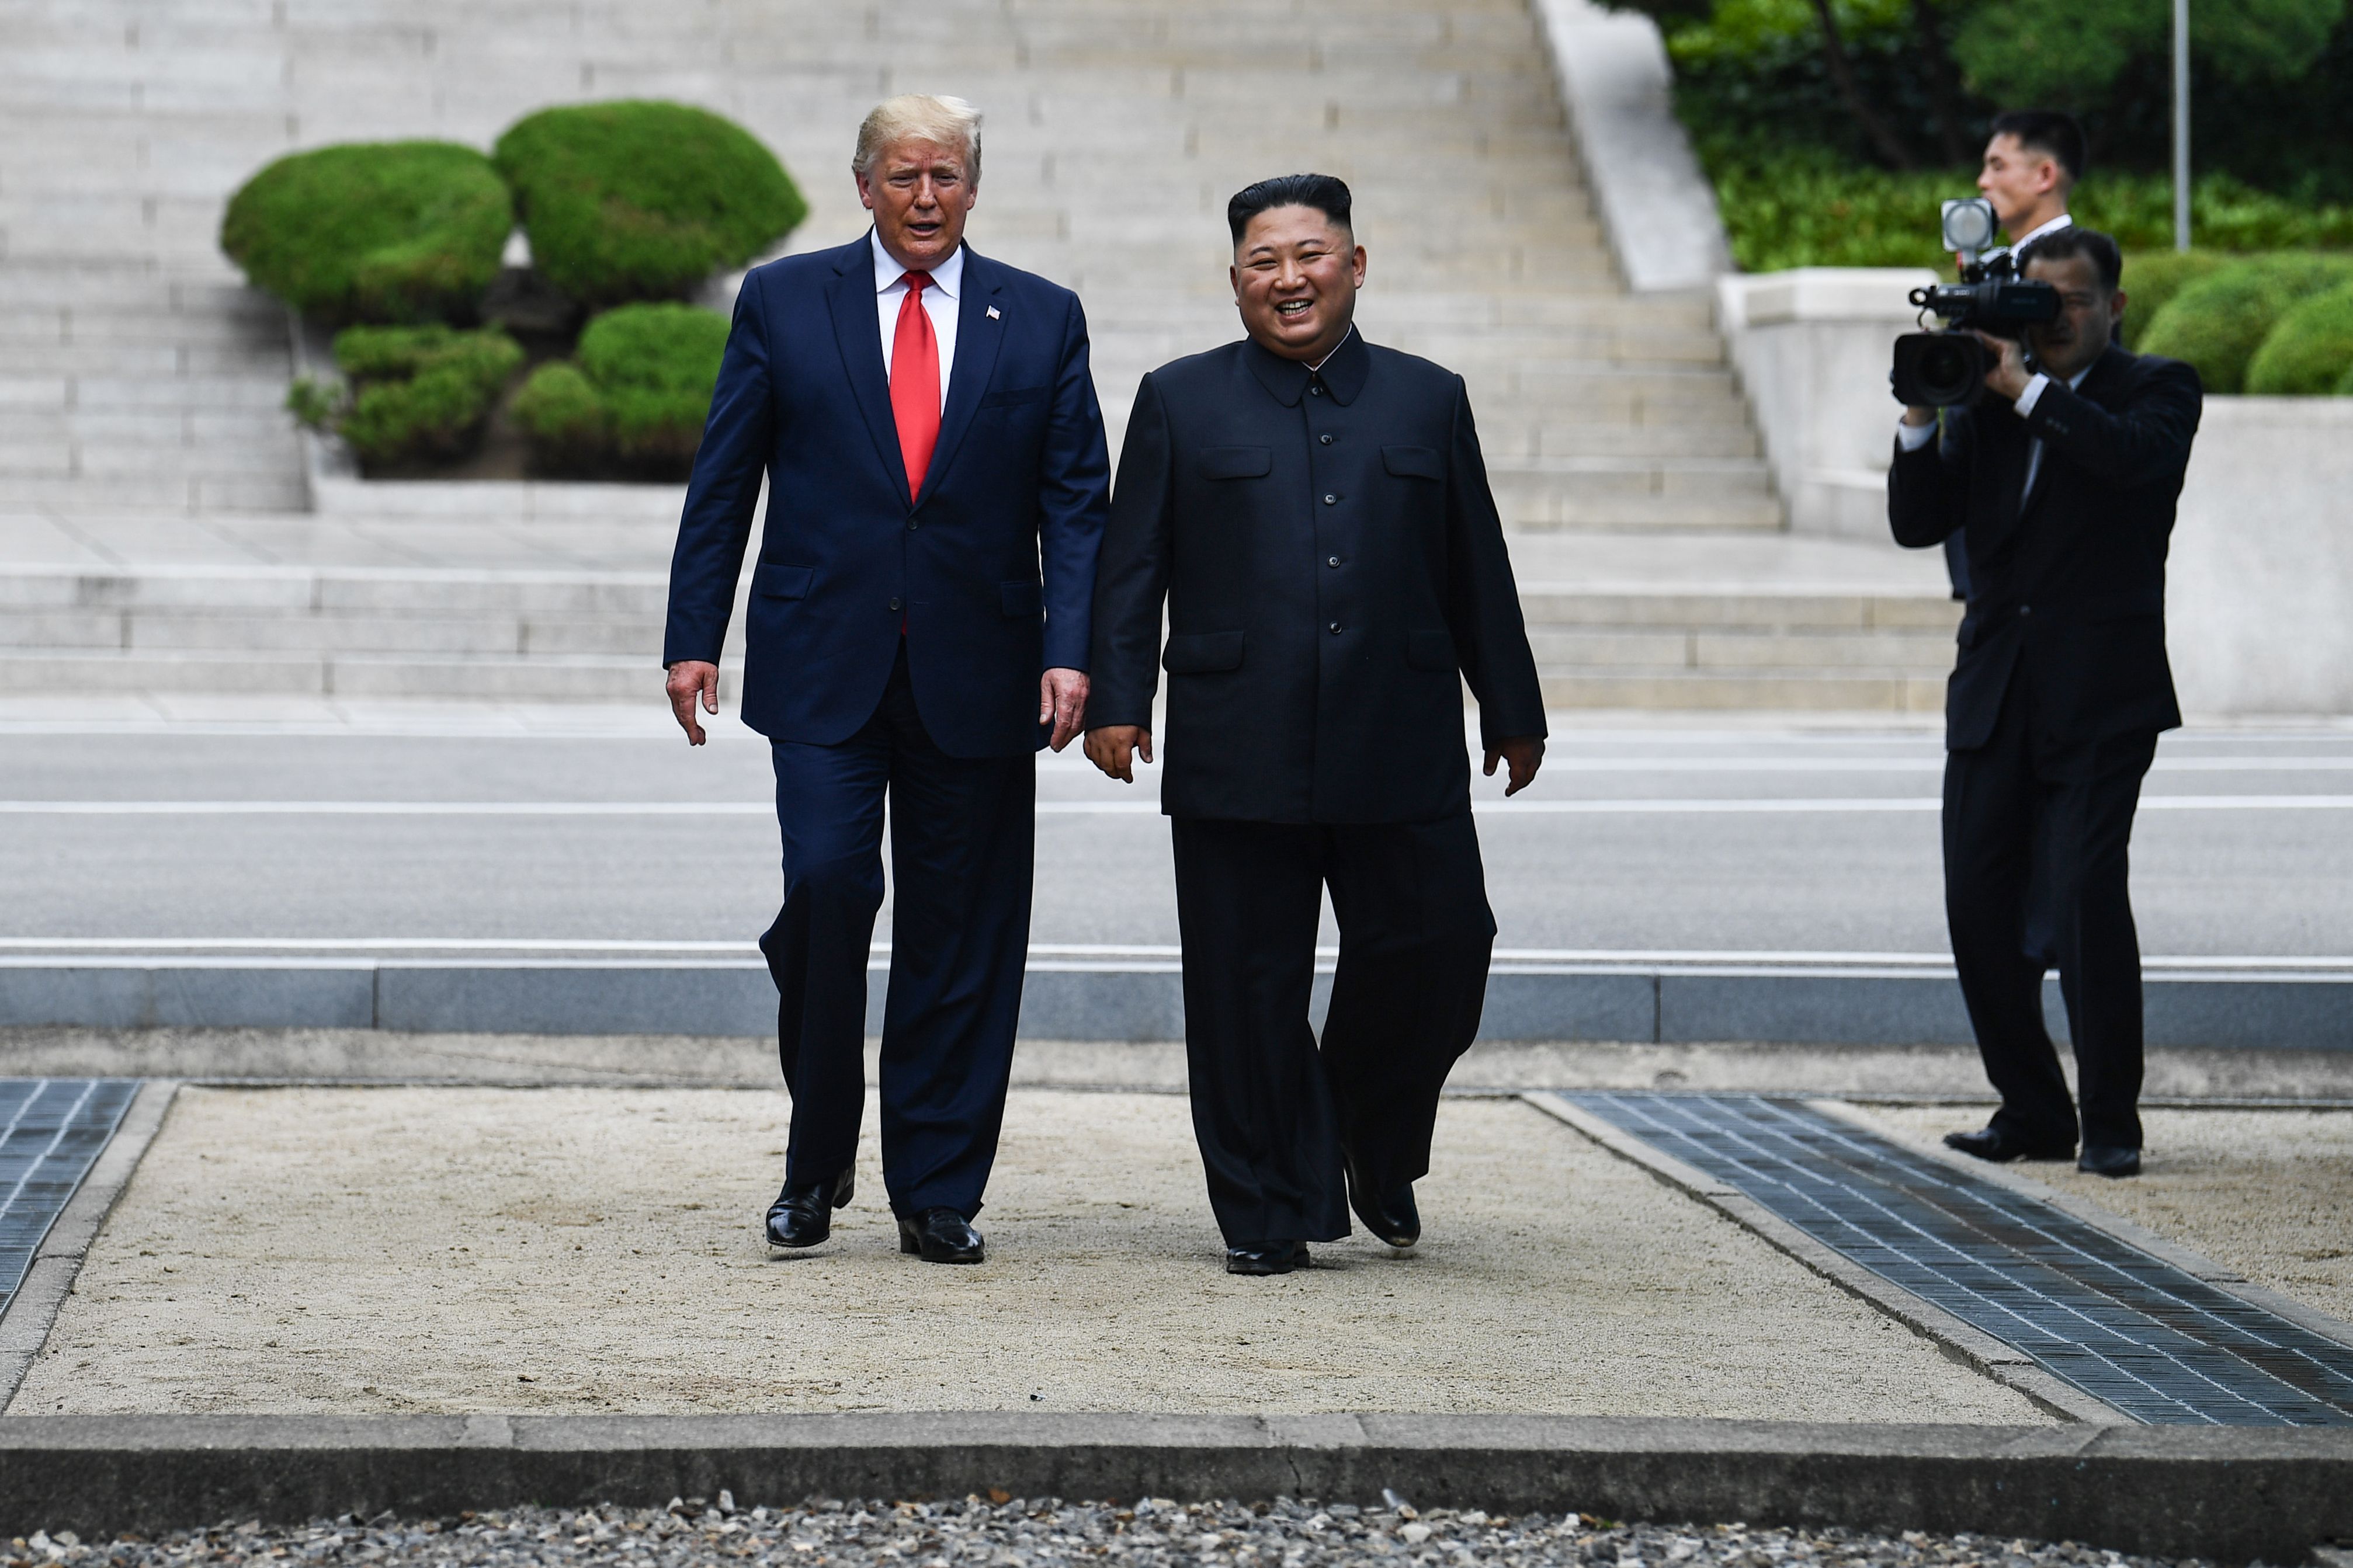 North Korea's leader Kim Jong Un walks with US President Donald Trump in the Joint Security Area (JSA) of Panmunjom in the DMZ.